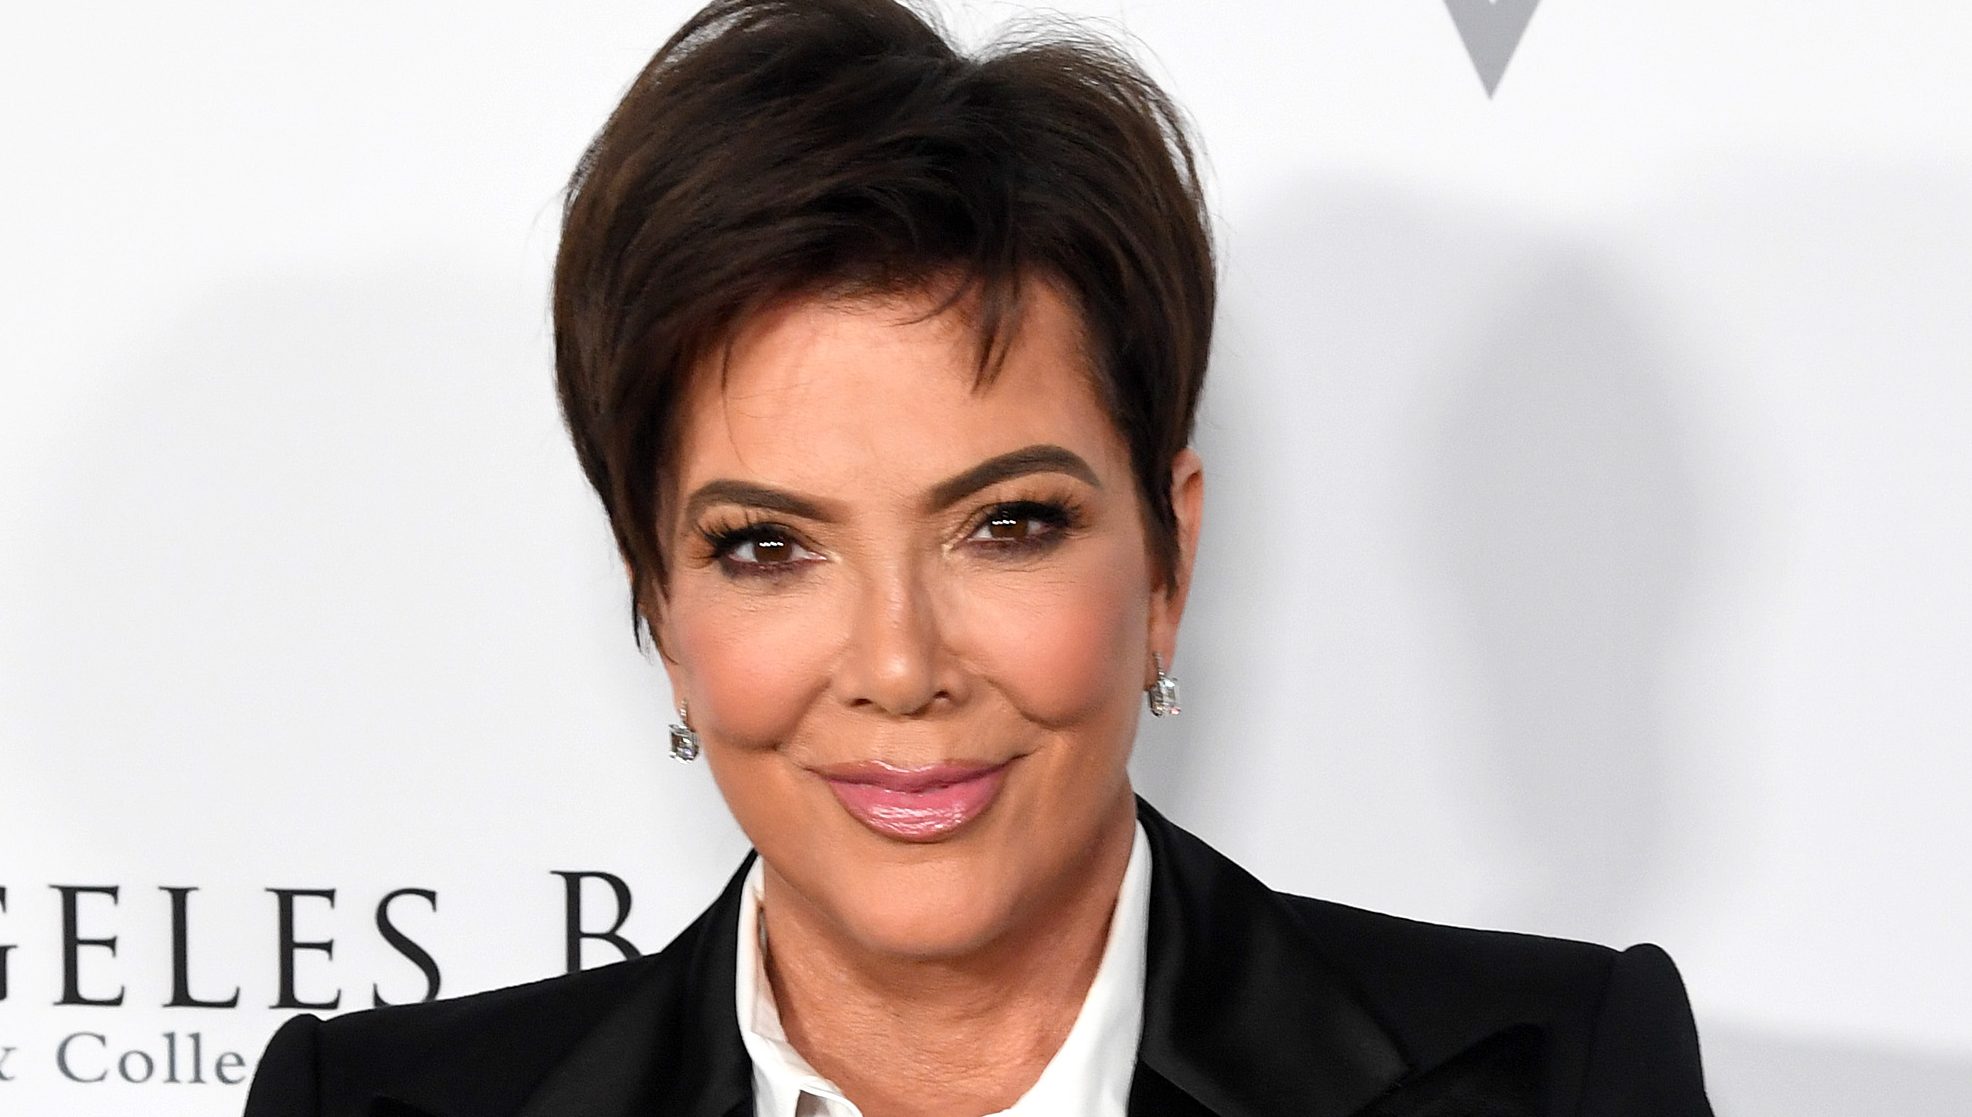 Kris Jenner Net Worth 5 Fast Facts You Need to Know